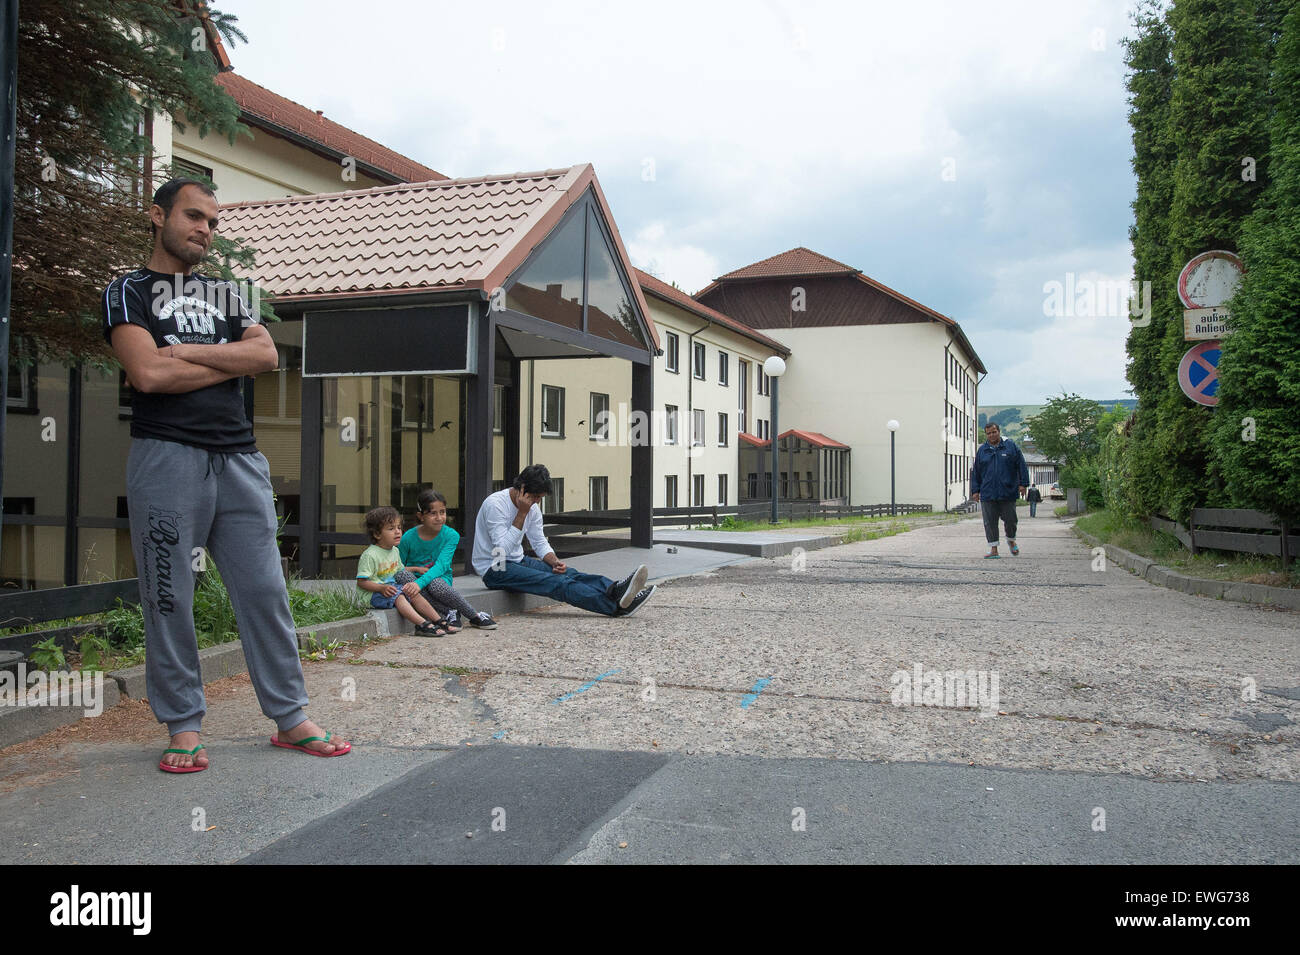 Freital, Germany. 25th June, 2015. Asylum seekers stand in front of their temporary accommodation in Freital, Germany, 25 June 2015. Stanislaw Tillich, Premier of the German State Saxony, has decided to intervene following protests and partly violent clashes surrounding a hotel that is to serve as a temporary accomodation for asylum seekers in Freital. He will visit the place on the same day to get a clearer picture of the current situation. PHOTO: PETER ENDIG/dpa/Alamy Live News Stock Photo